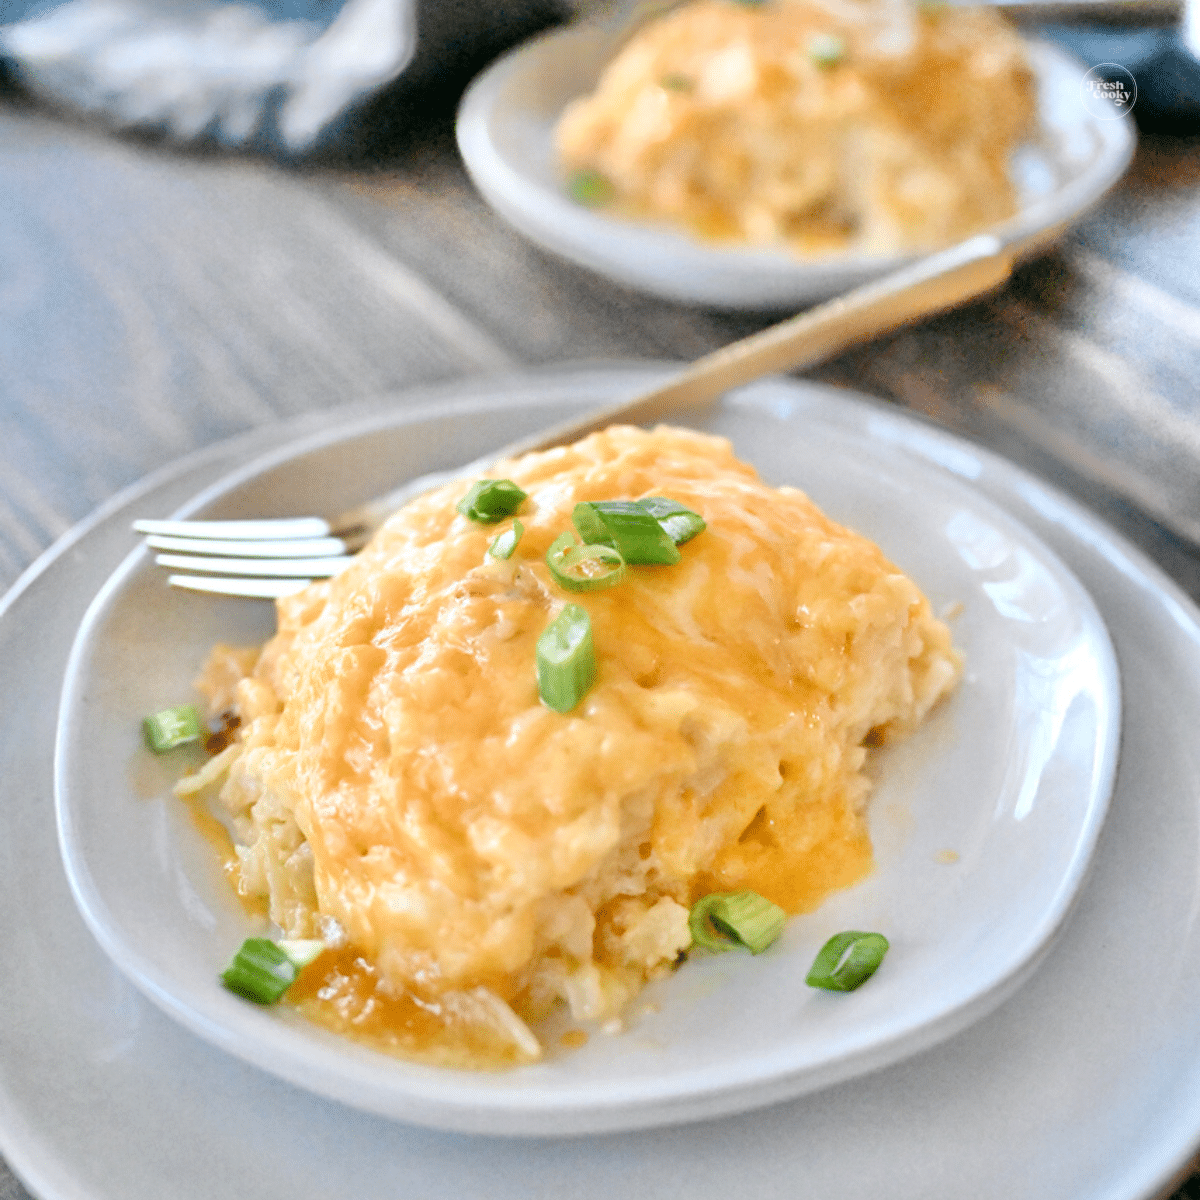 Large serving of cracker barrel hashbrown casserole on plate garnished with green onions.